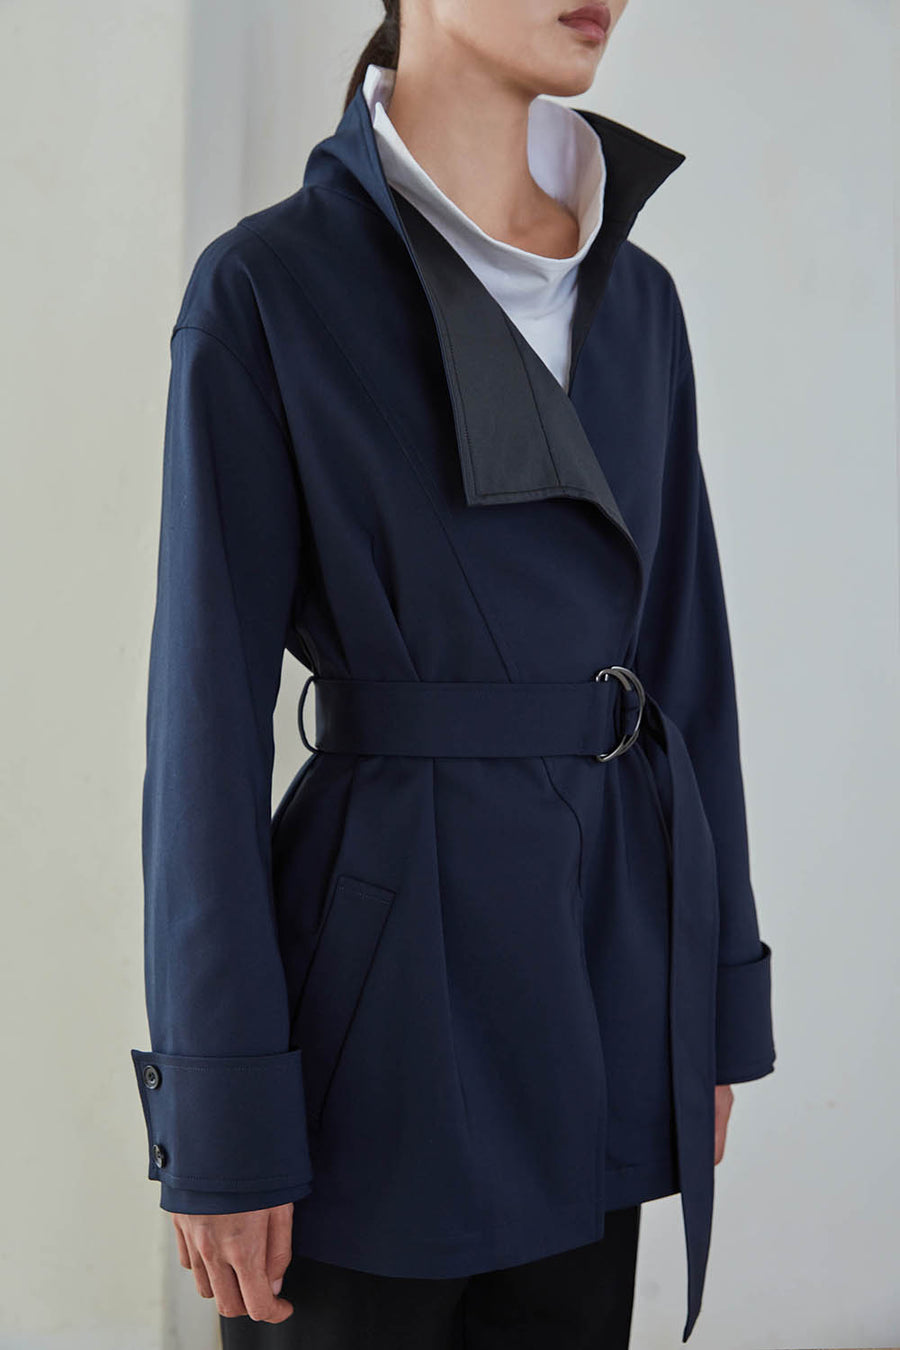 LEZHE Short Trench Coat with High Collar